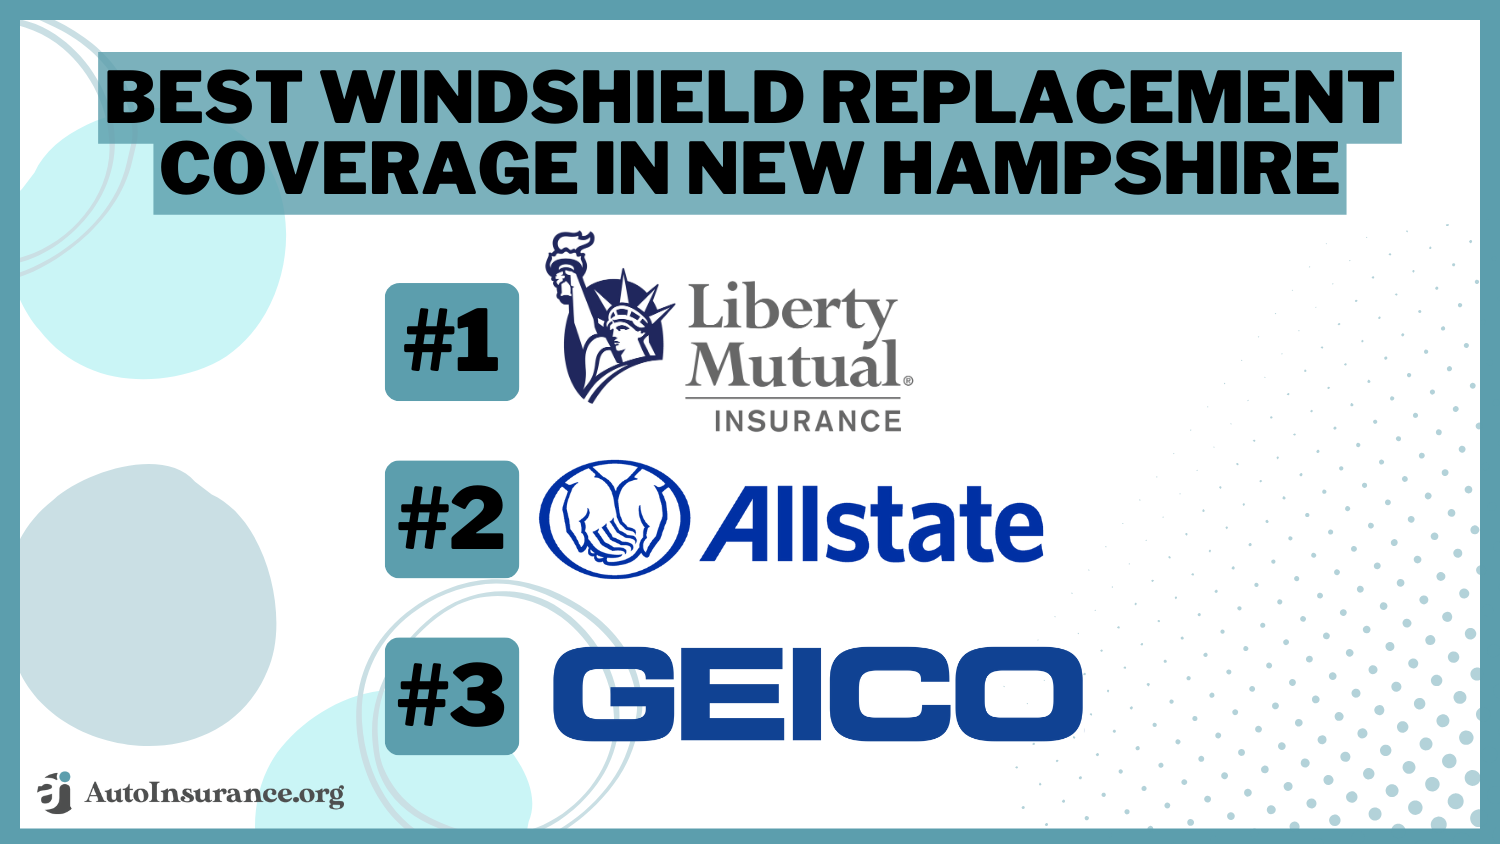 Best Windshield Replacement Coverage in New Hampshire: Liberty Mutual, Allstate, and Geico